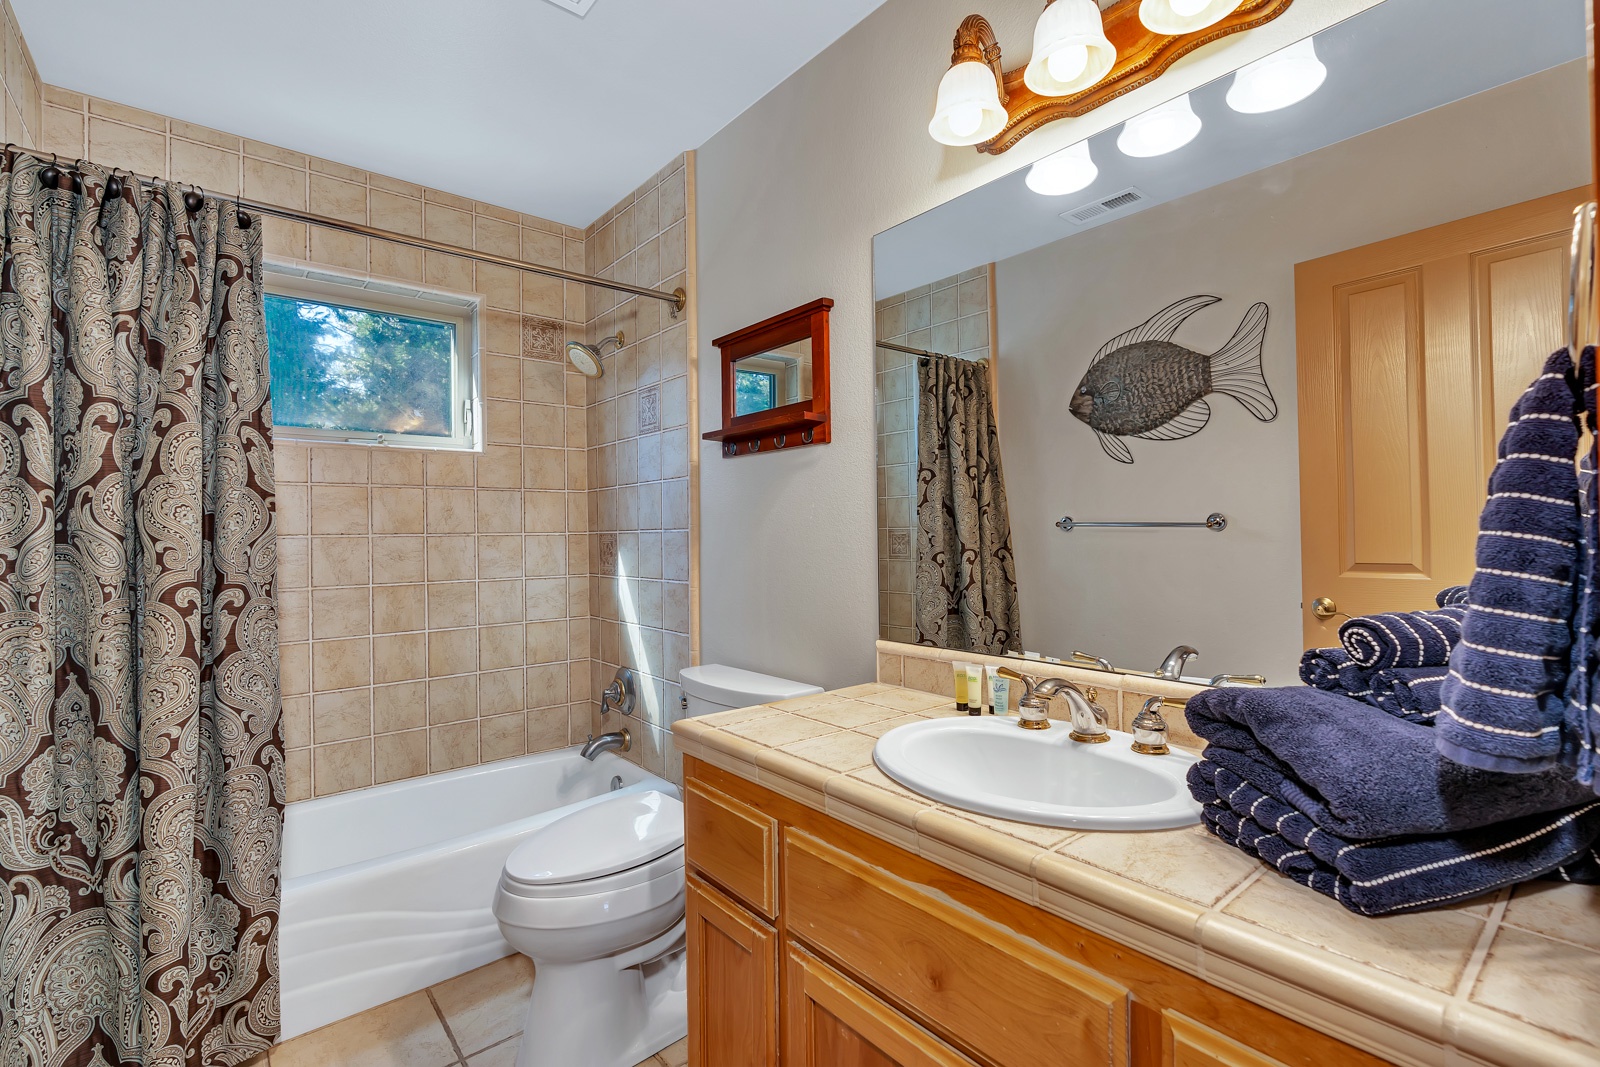 This 2nd floor full bathroom includes a single vanity & shower/tub combo